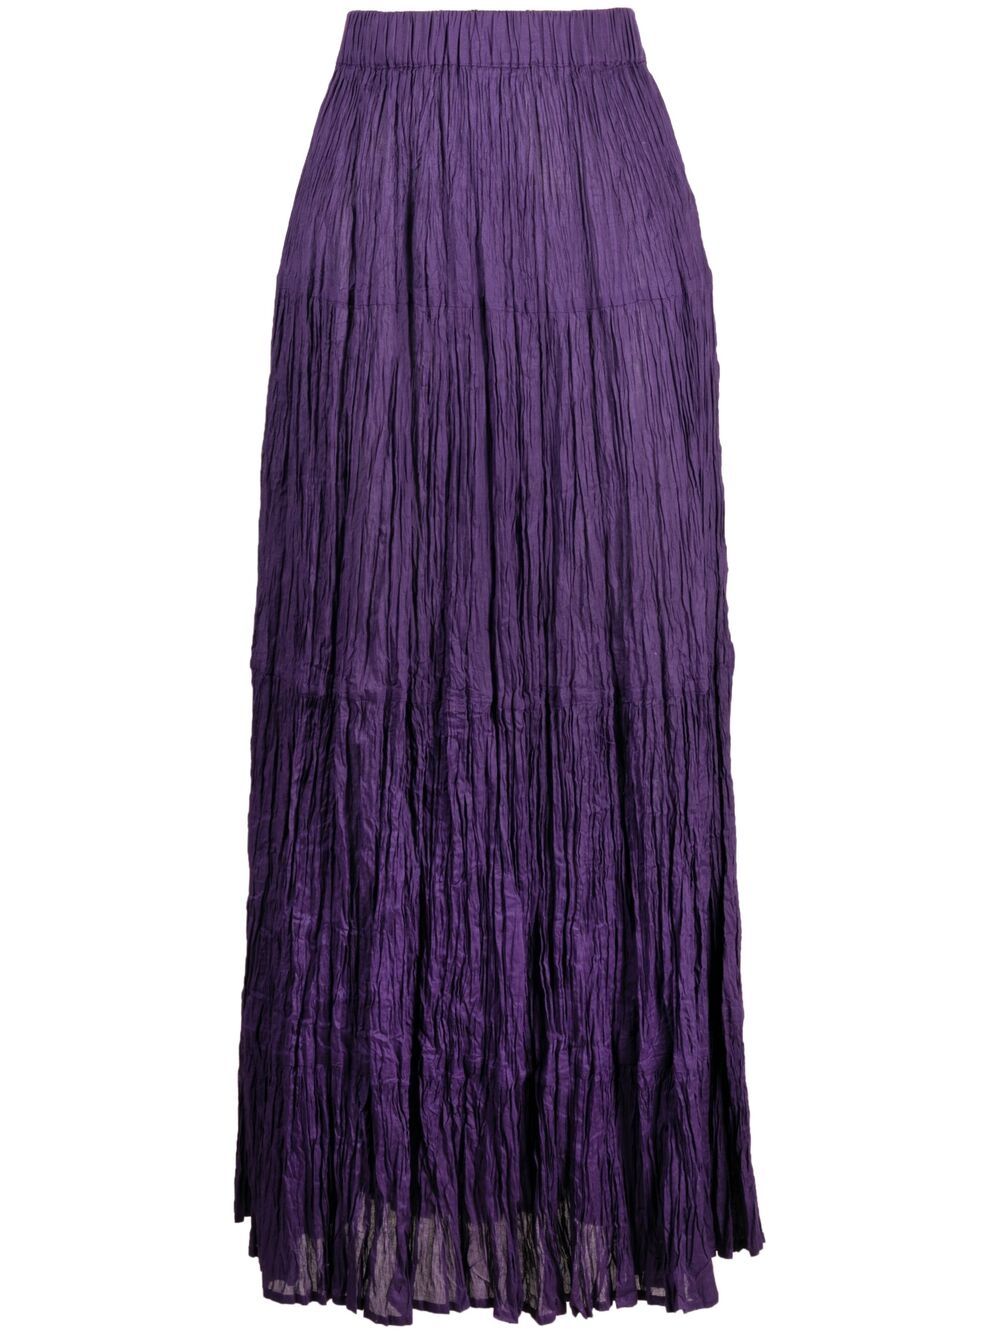 P.A.R.O.S.H. crinkled maxi skirt - Purple